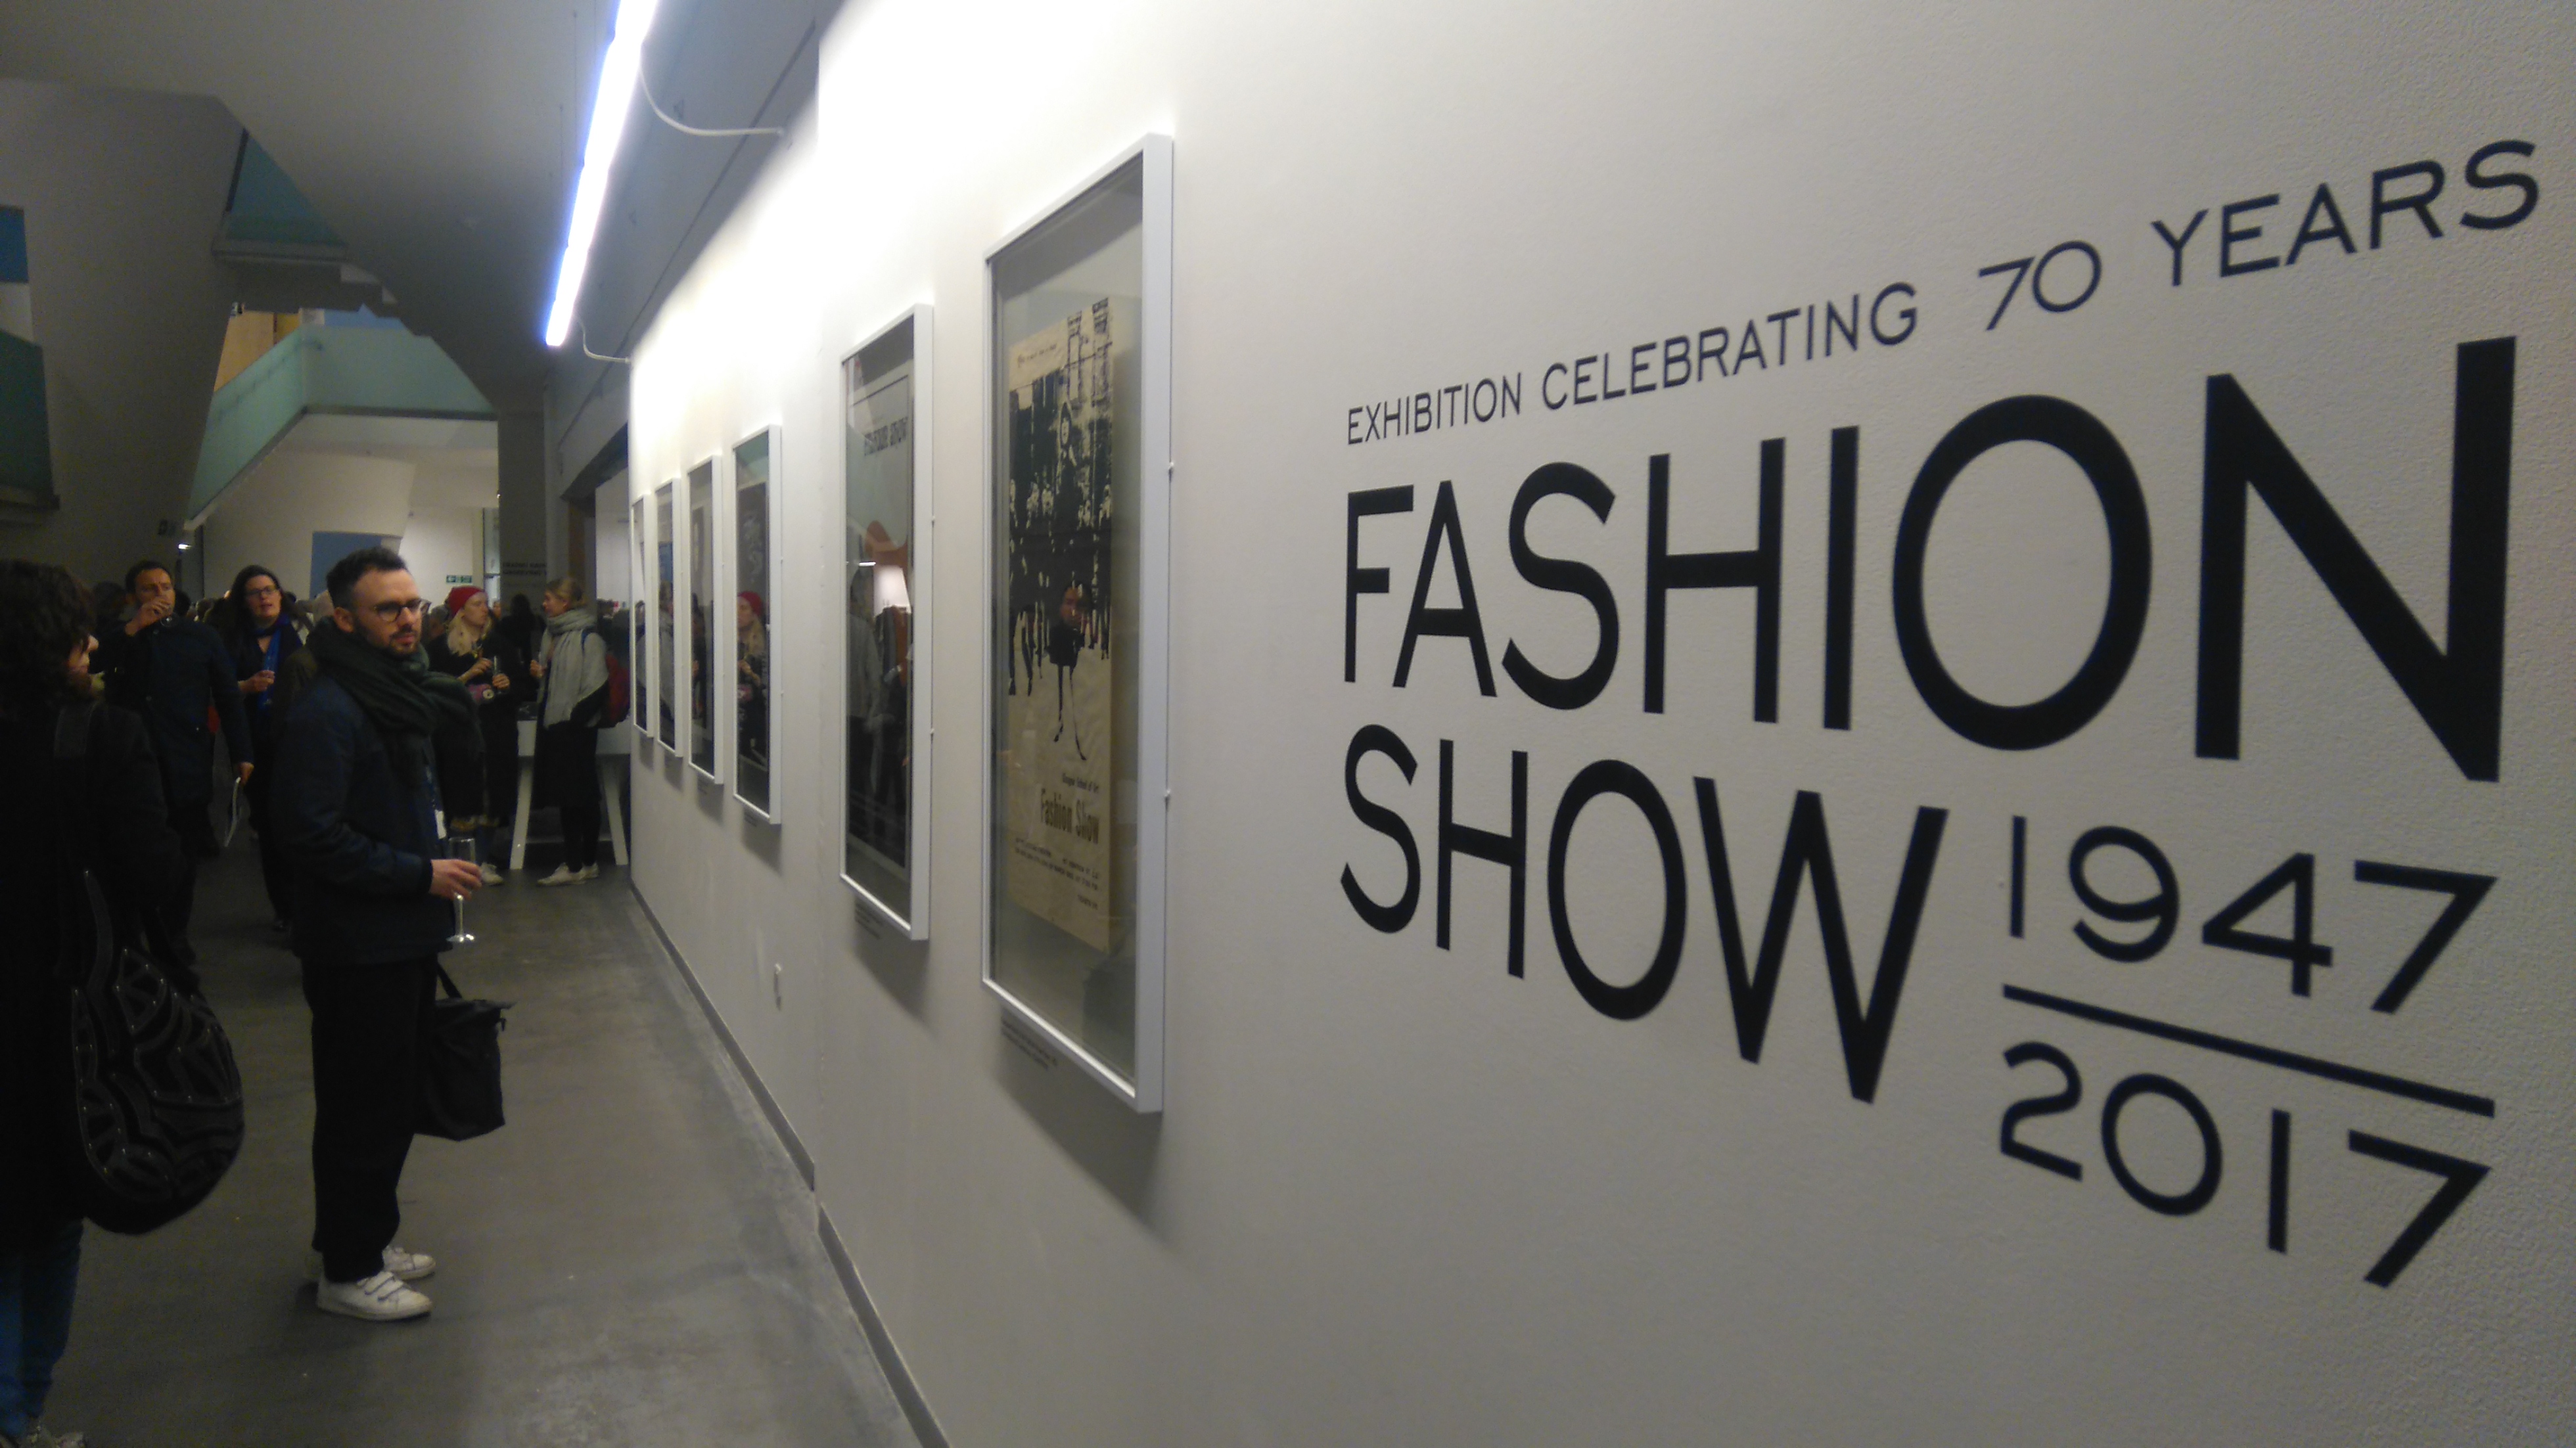 Opening night of The Glasgow School of Art Fashion Show 70th Anniversary exhibition on the 3rd of March.